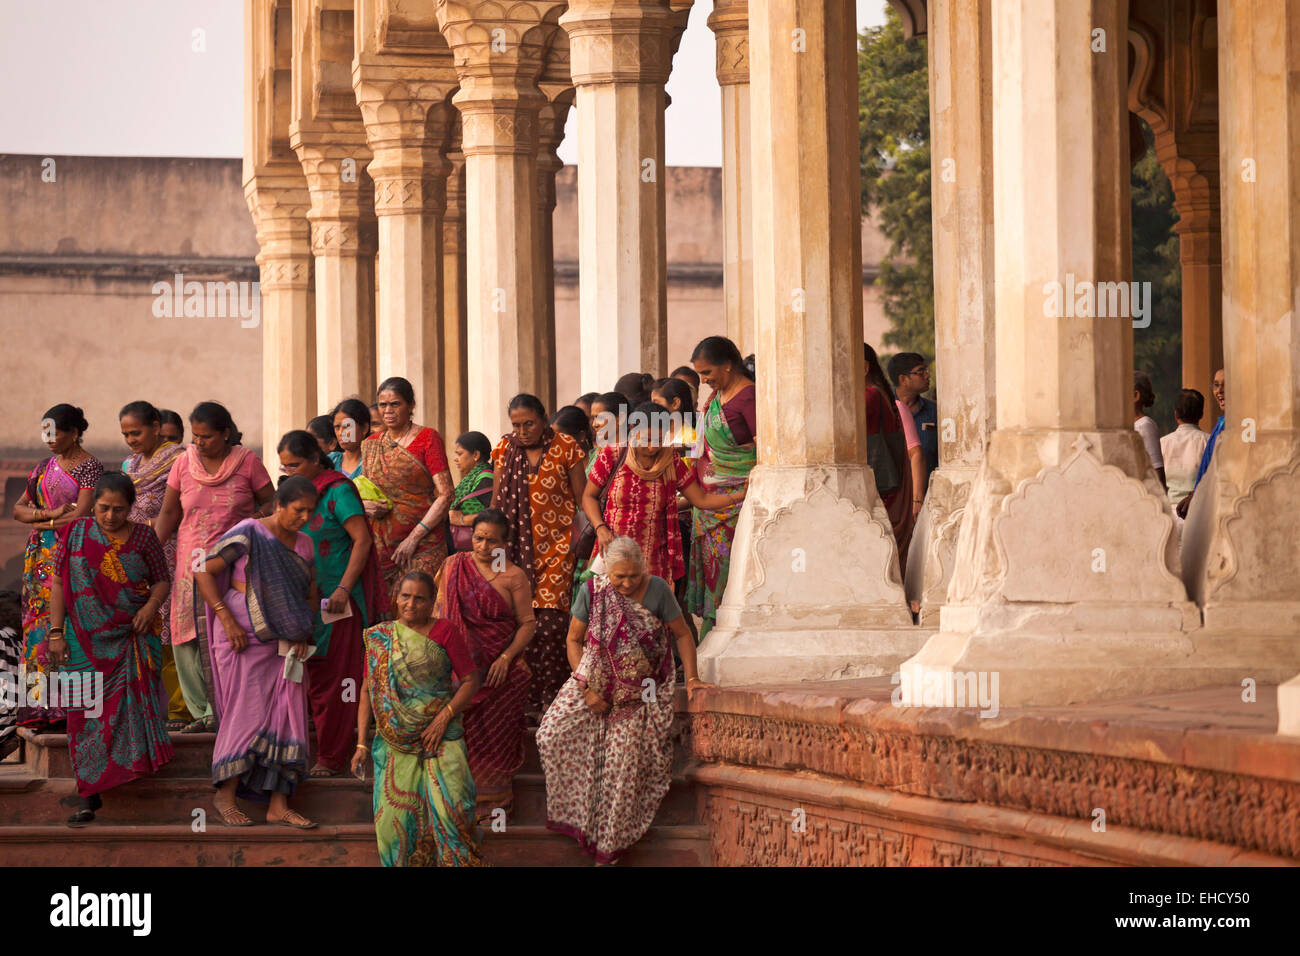 visitors at the columned hall of the Red Fort in Agra, Uttar Pradesh, India, Asia Stock Photo